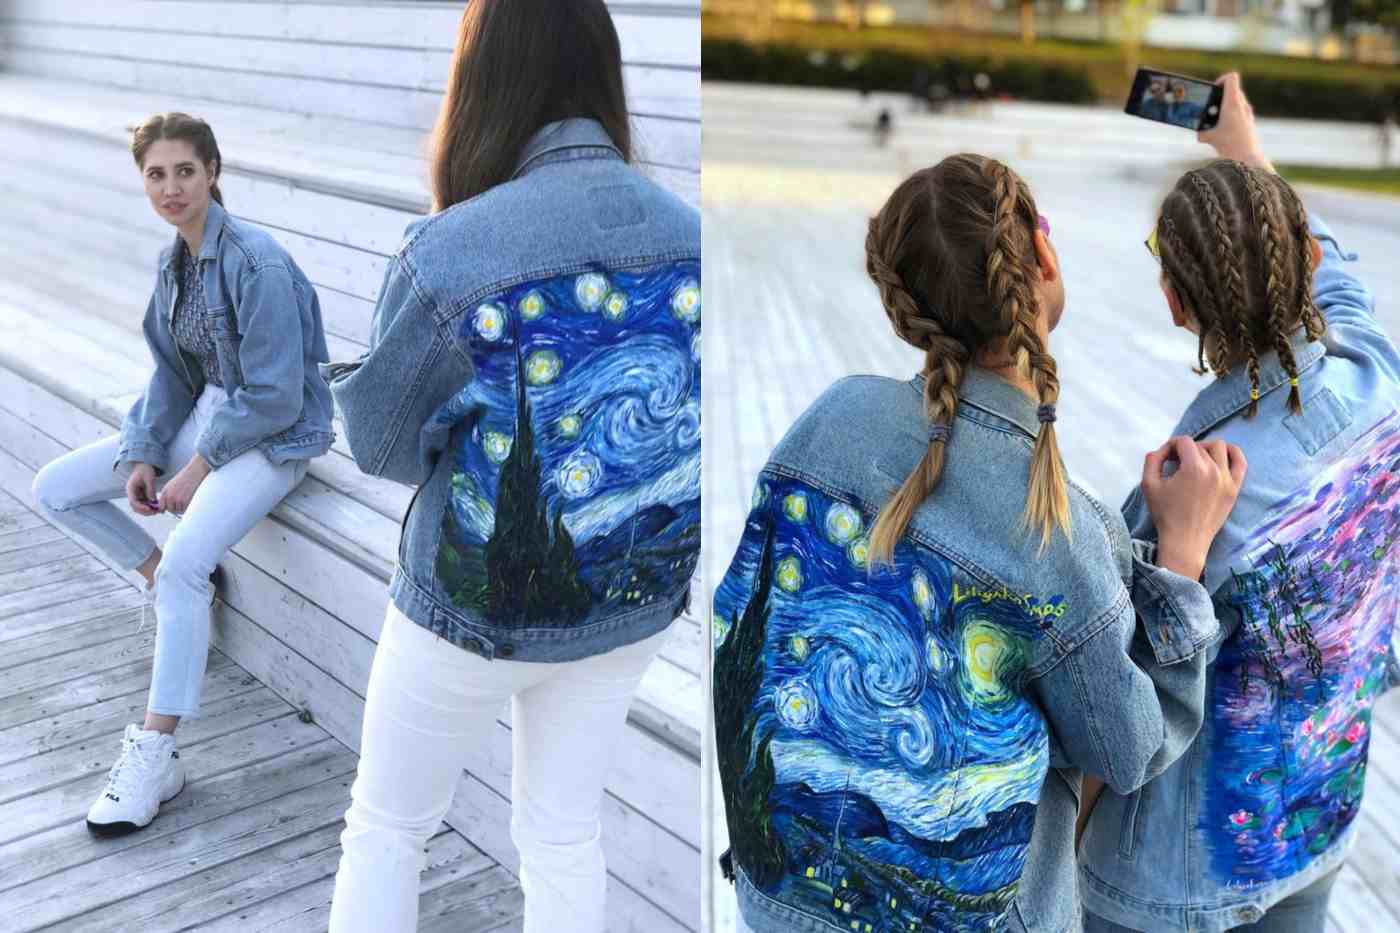 painted Jean jackets painted natural motif night sky bume